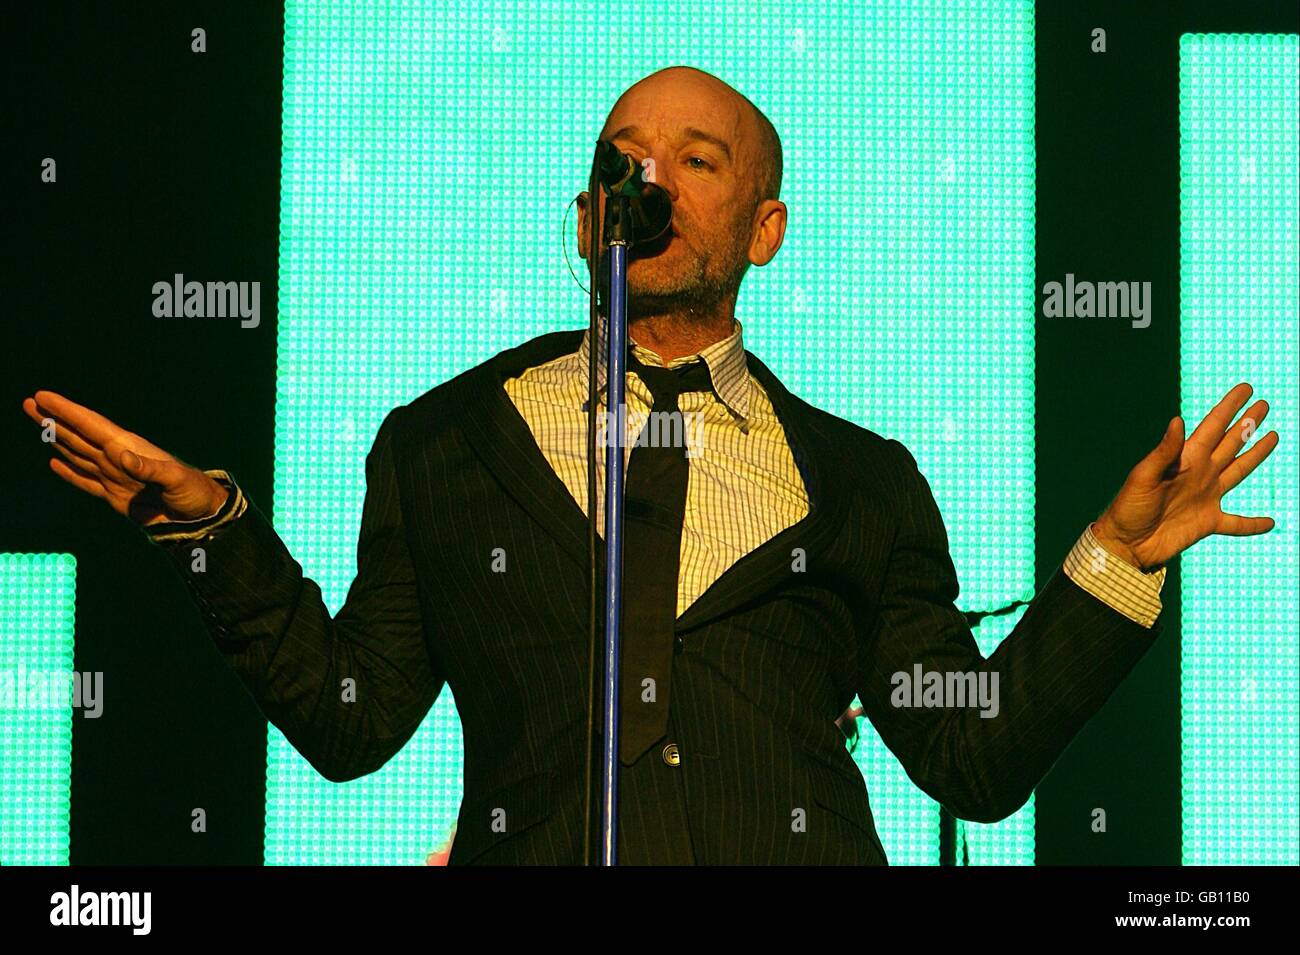 Michael Stipe on stage during REM's performance during the Oxegen Festival 2008 at the Punchestown Racecourse, Naas, County Kildare, Ireland Stock Photo